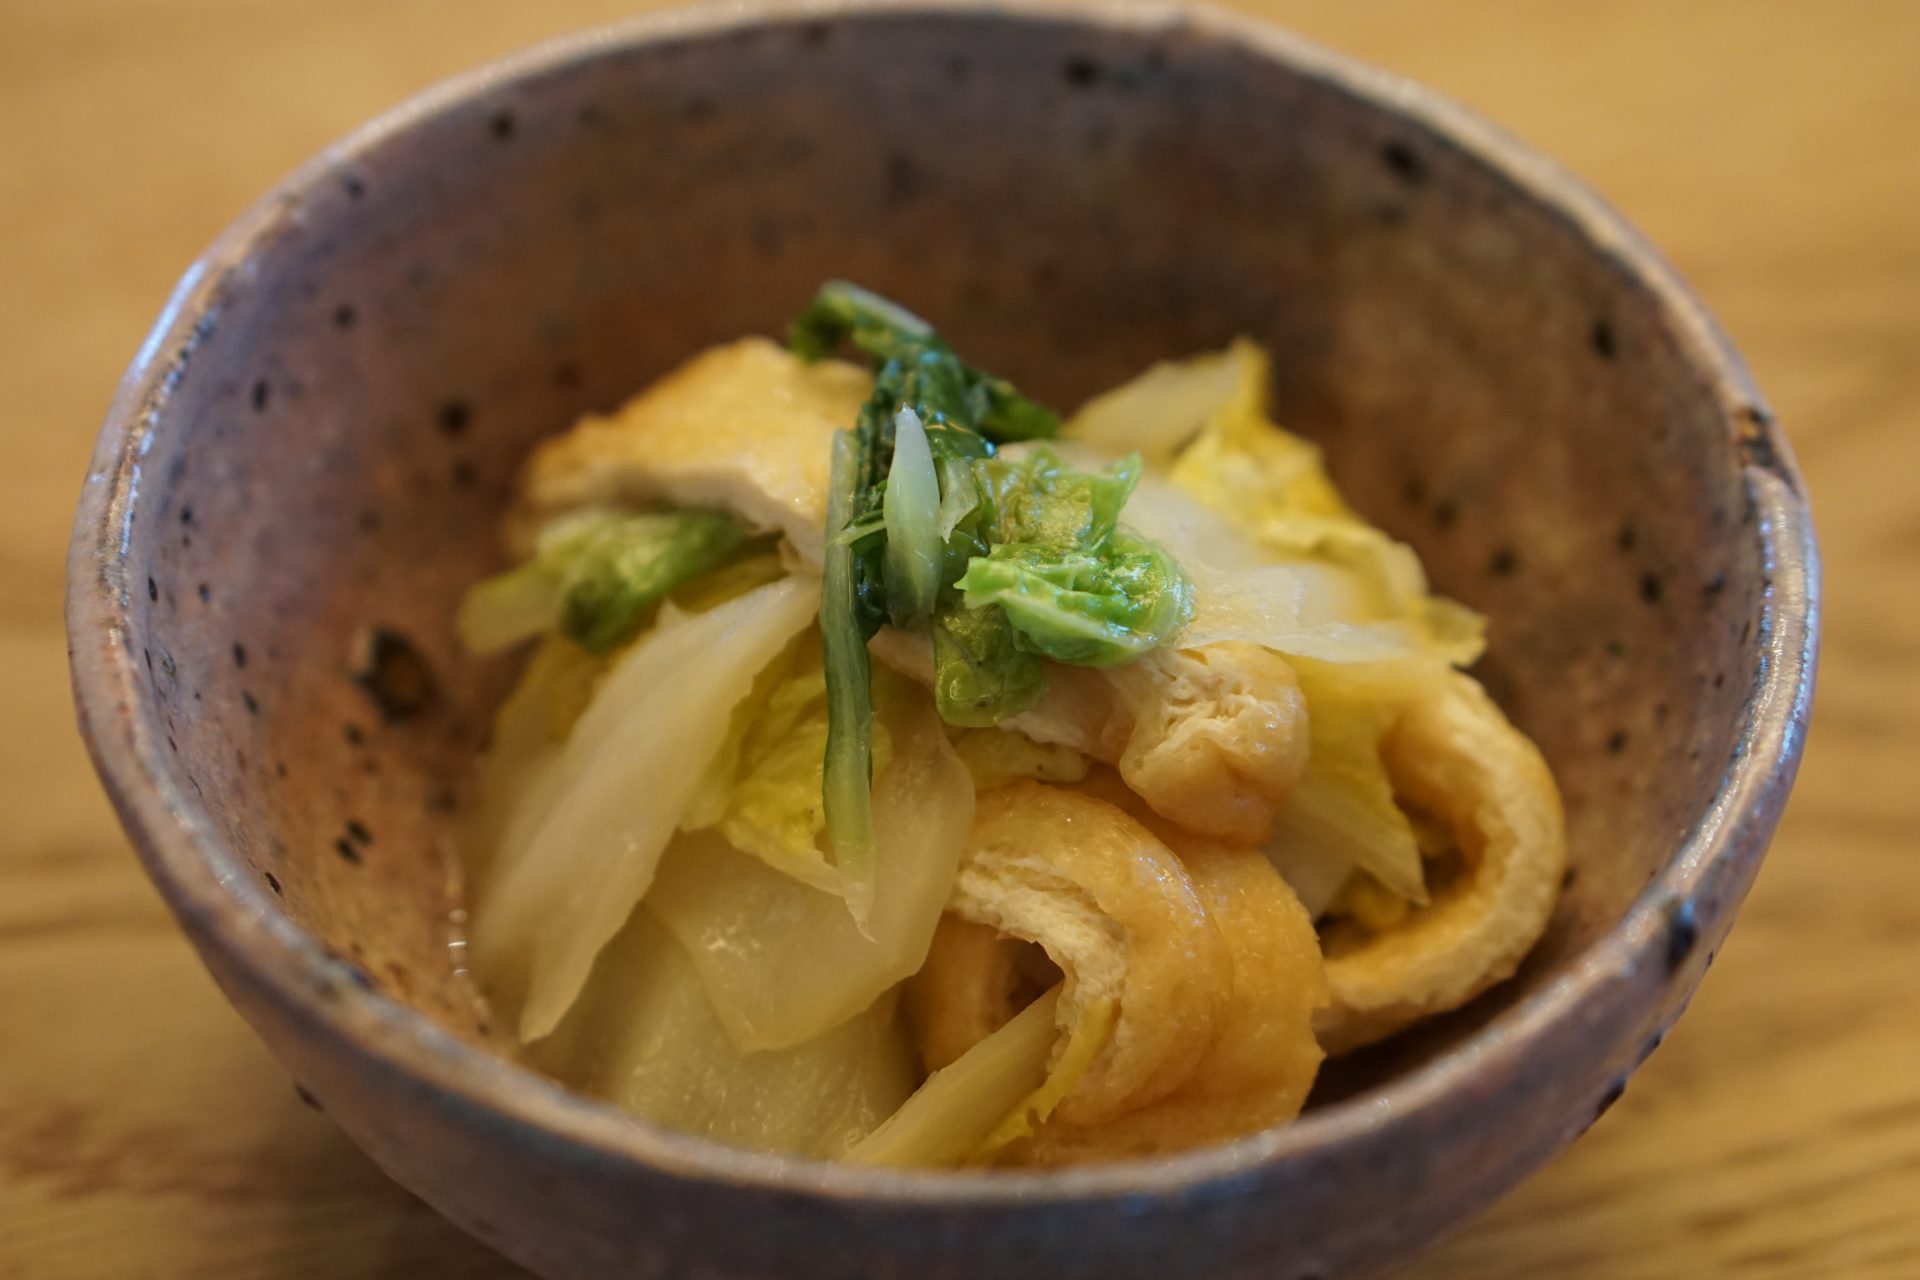 Simmered Napa Cabbage with Fried Tofu